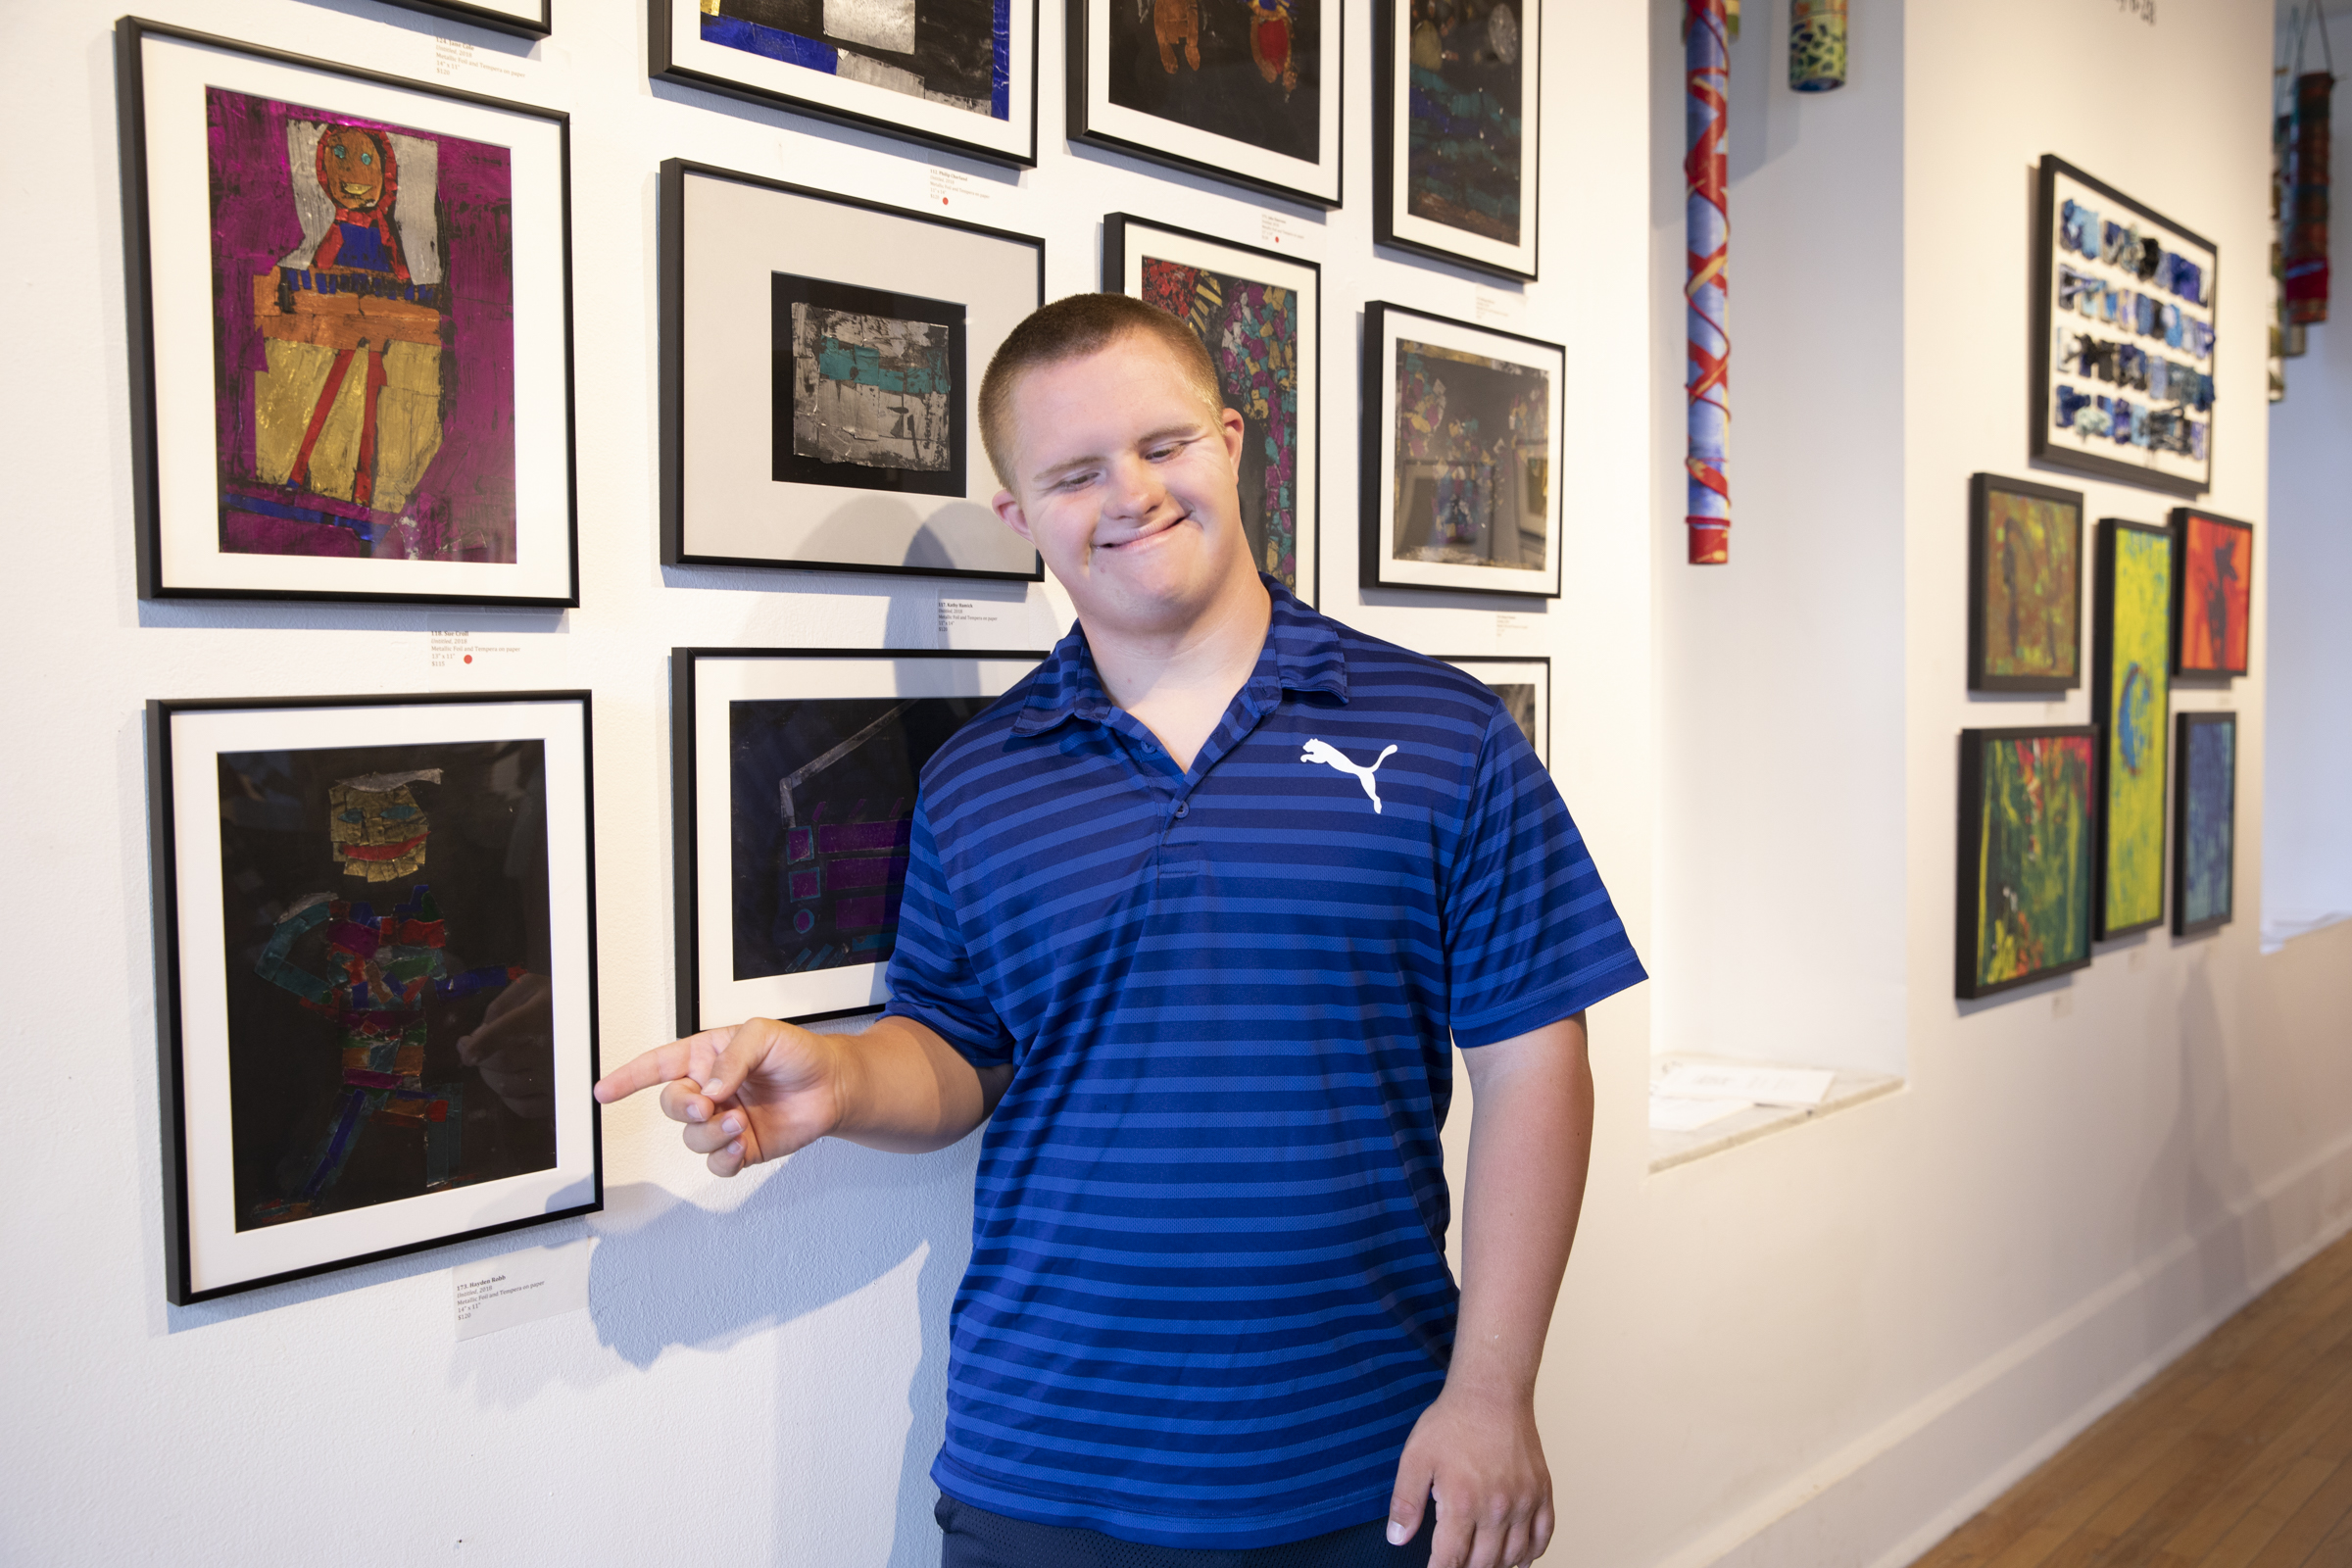 Image description: CATA artist Hayden Robb stands in an art gallery, smiling and pointing to his painting.